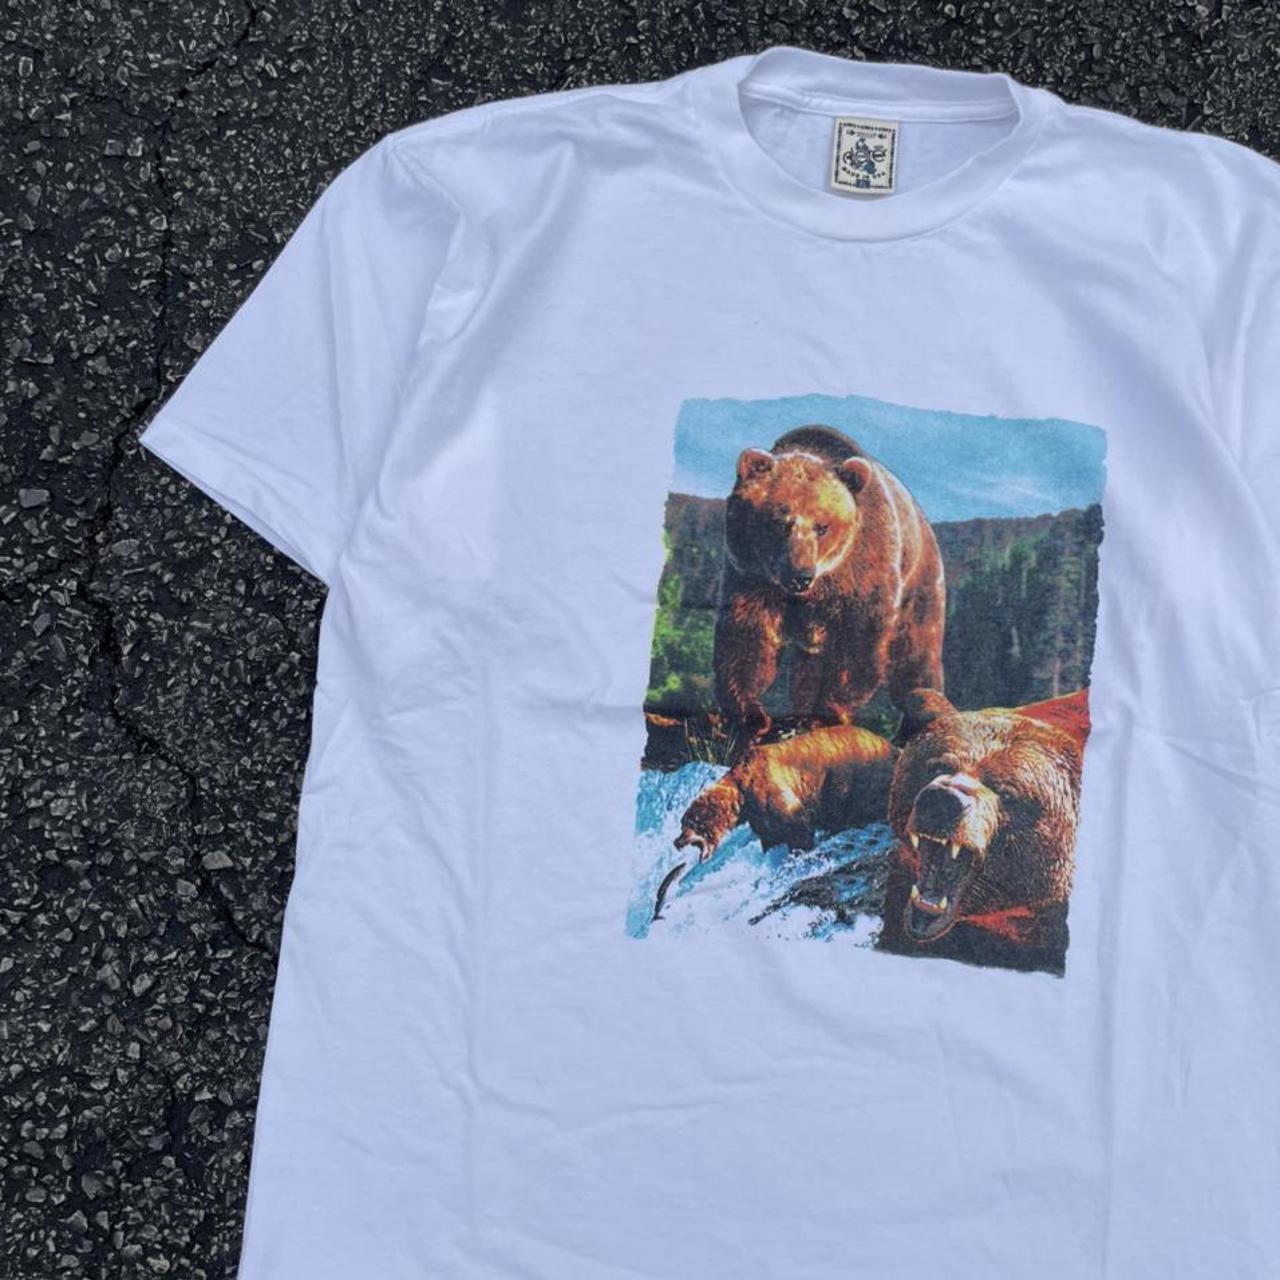 Product Image 2 - Vintage grizzly bear graphic t